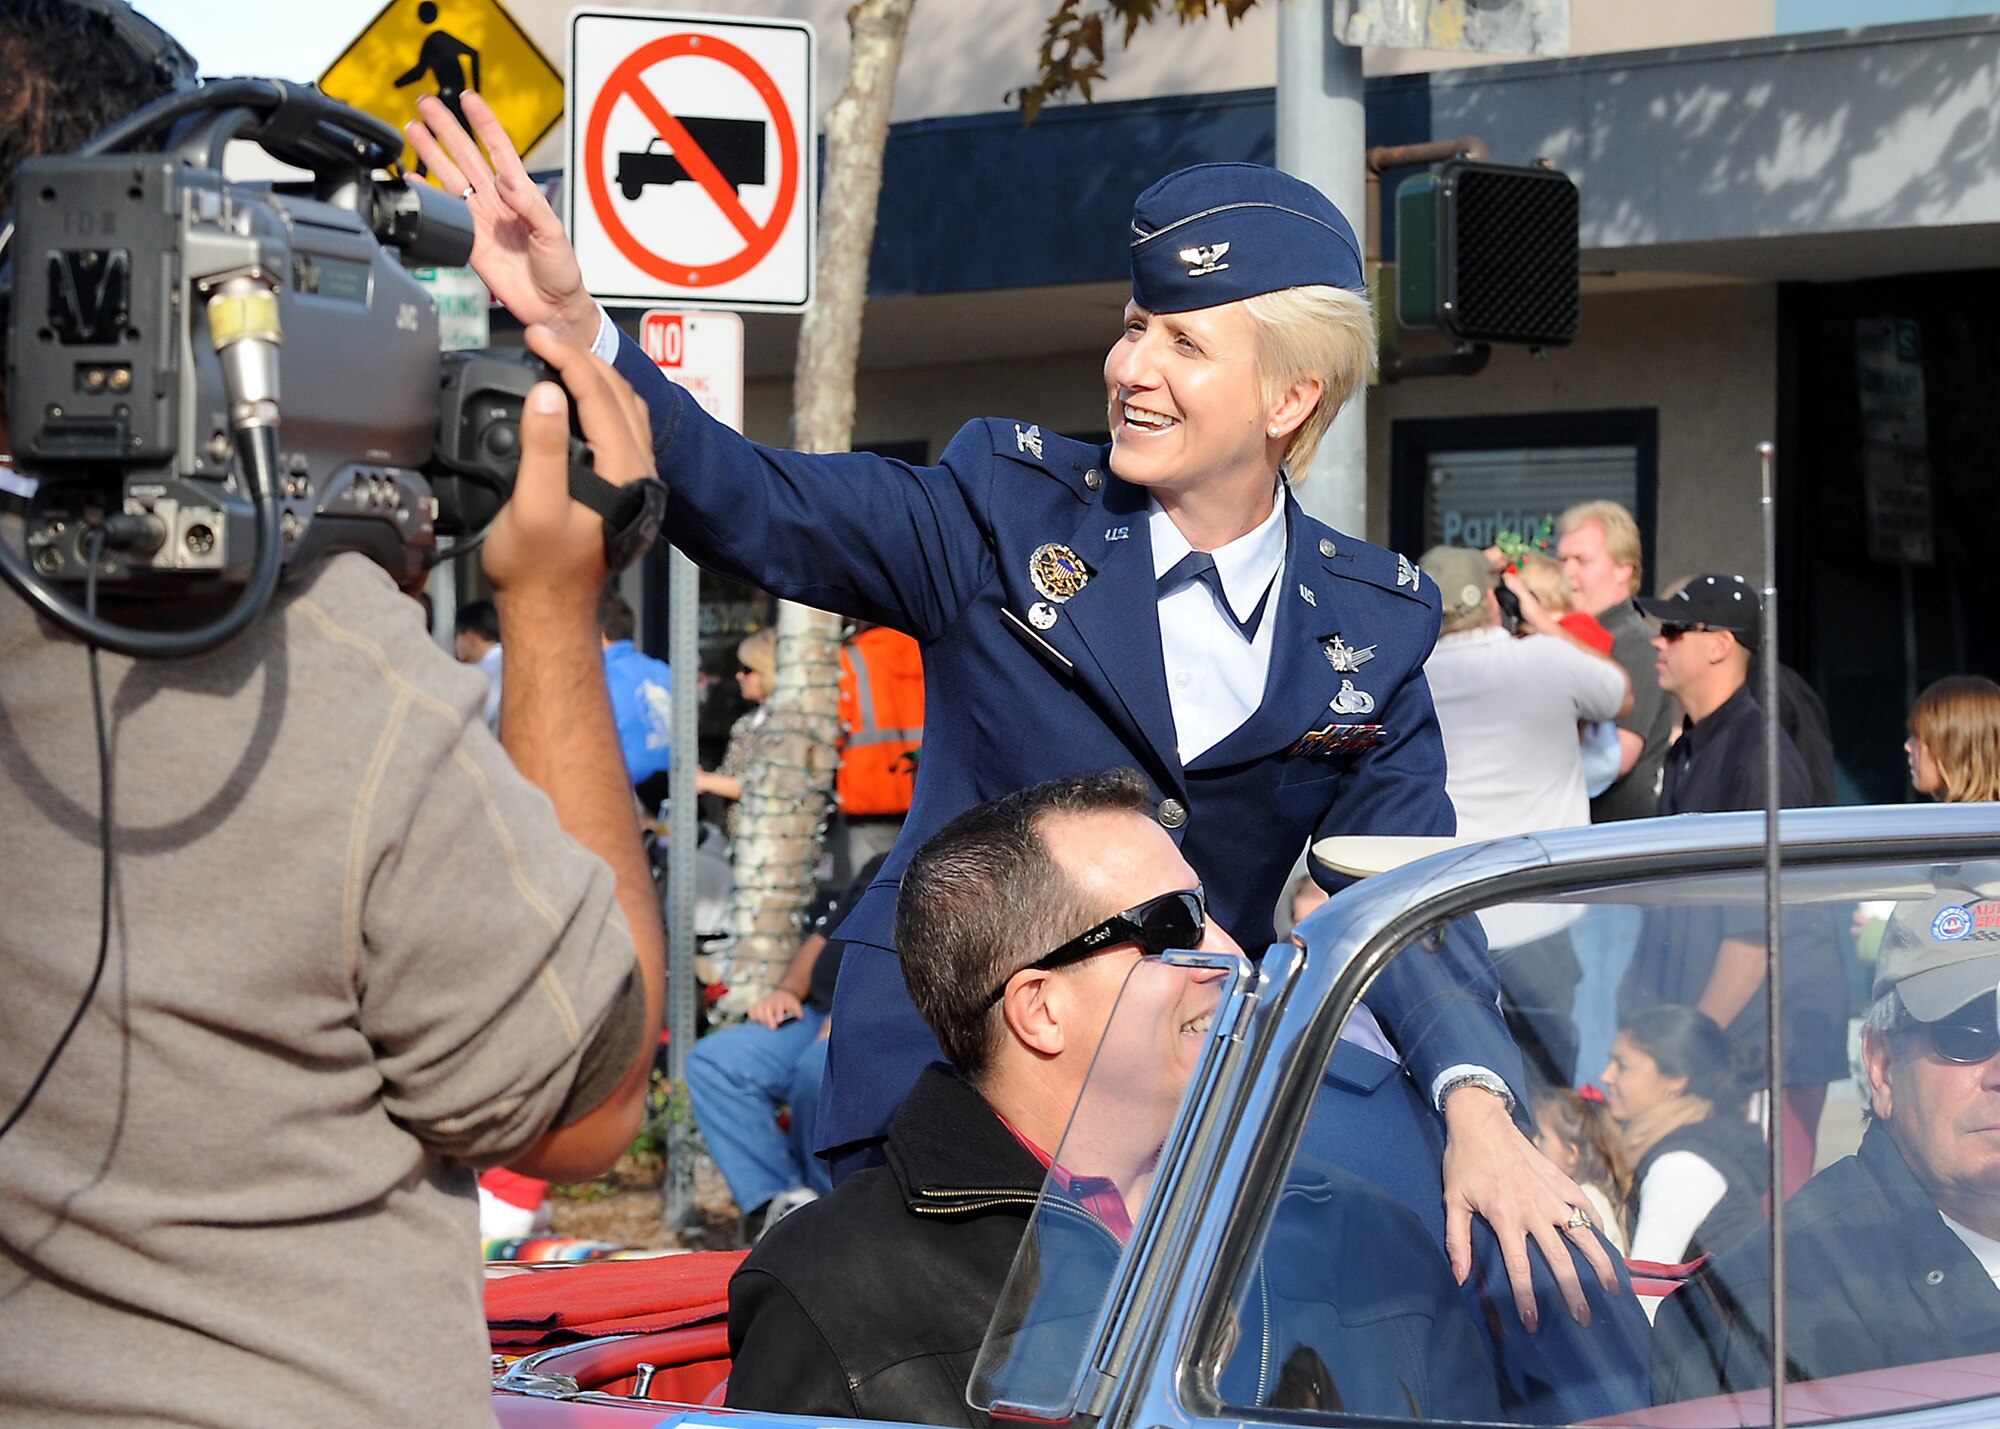 Col. Anita Latin, 61st Air Base Wing commander, rides in a vintage 1957 Thunderbird in the 45th Annual El Segundo Holiday Parade, Dec. 14. The Los Angeles Air Force Base Honor Guard also represented the base in the annual event, which included local dignitaries, marching bands, and community groups. (Photo by Joe Juarez)